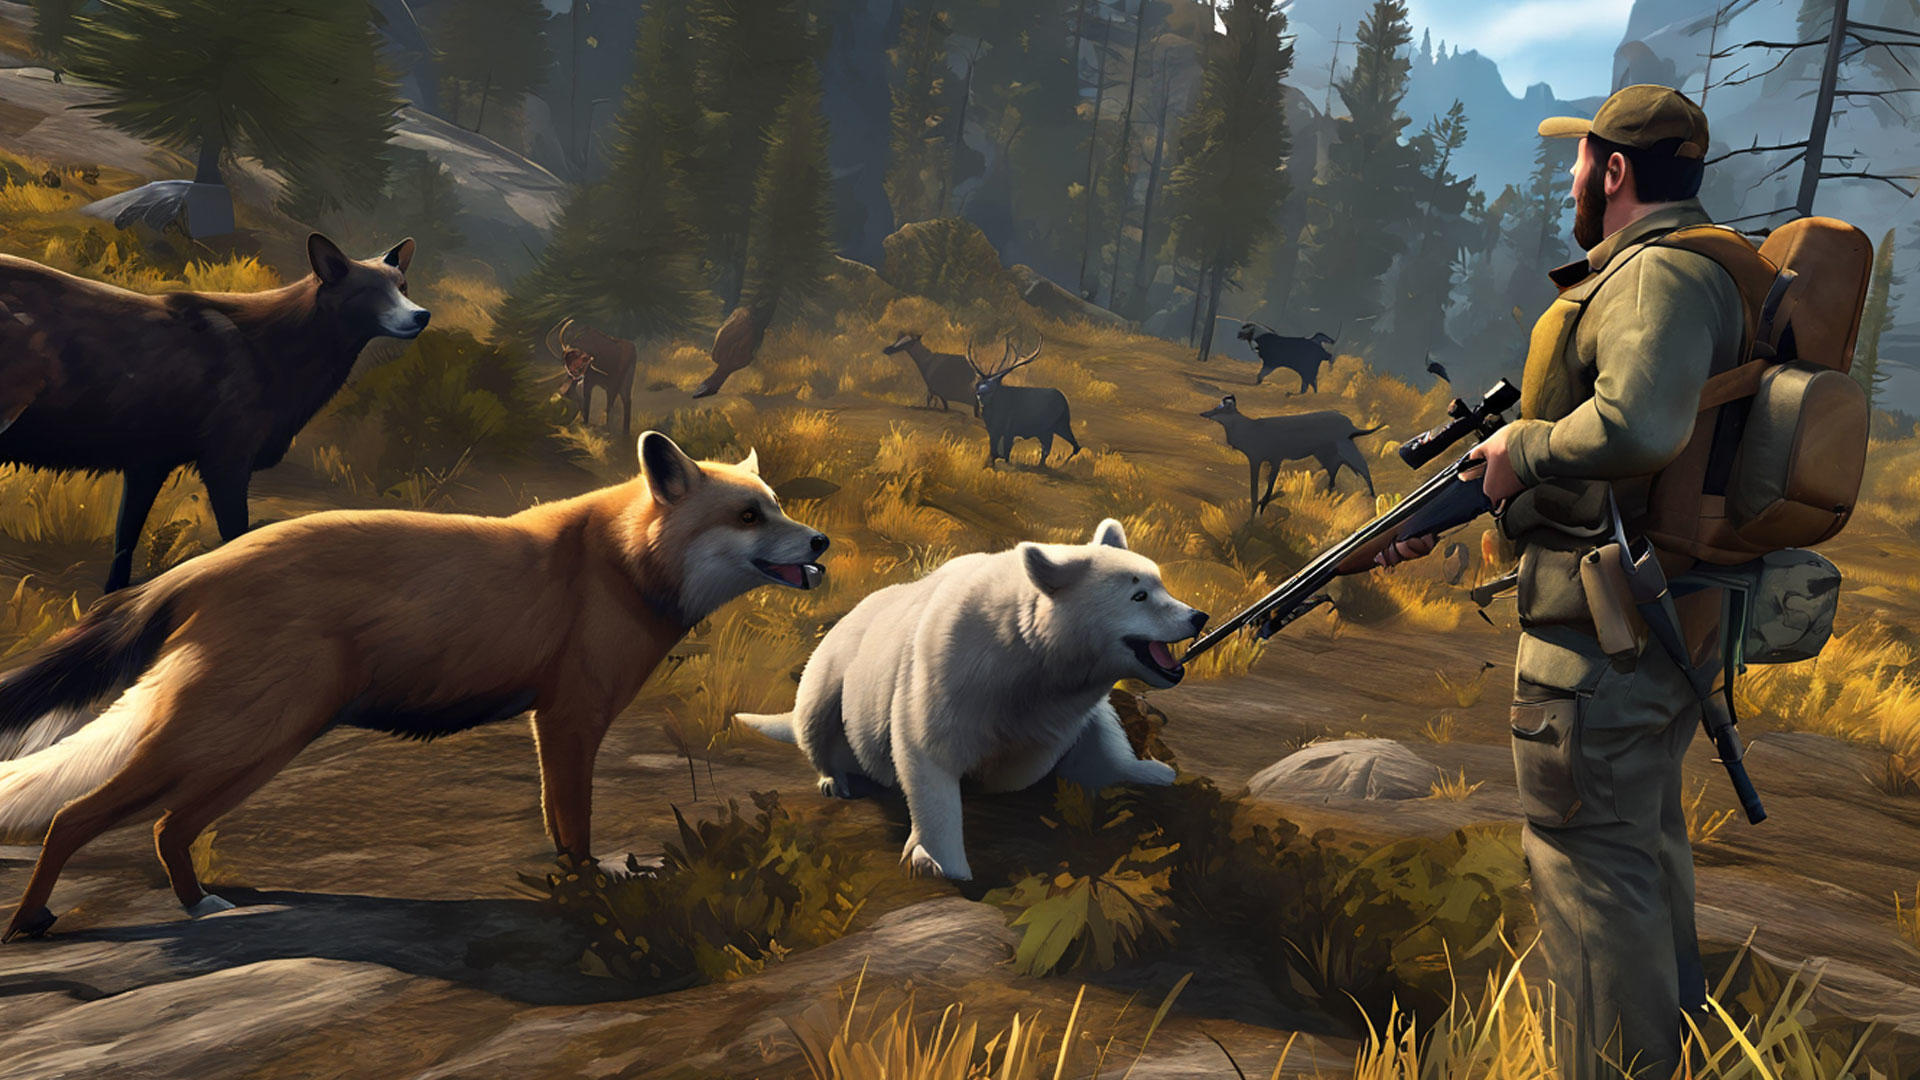 Screenshot 1 of Animal Hunting: Jeux De Chasse 0.2